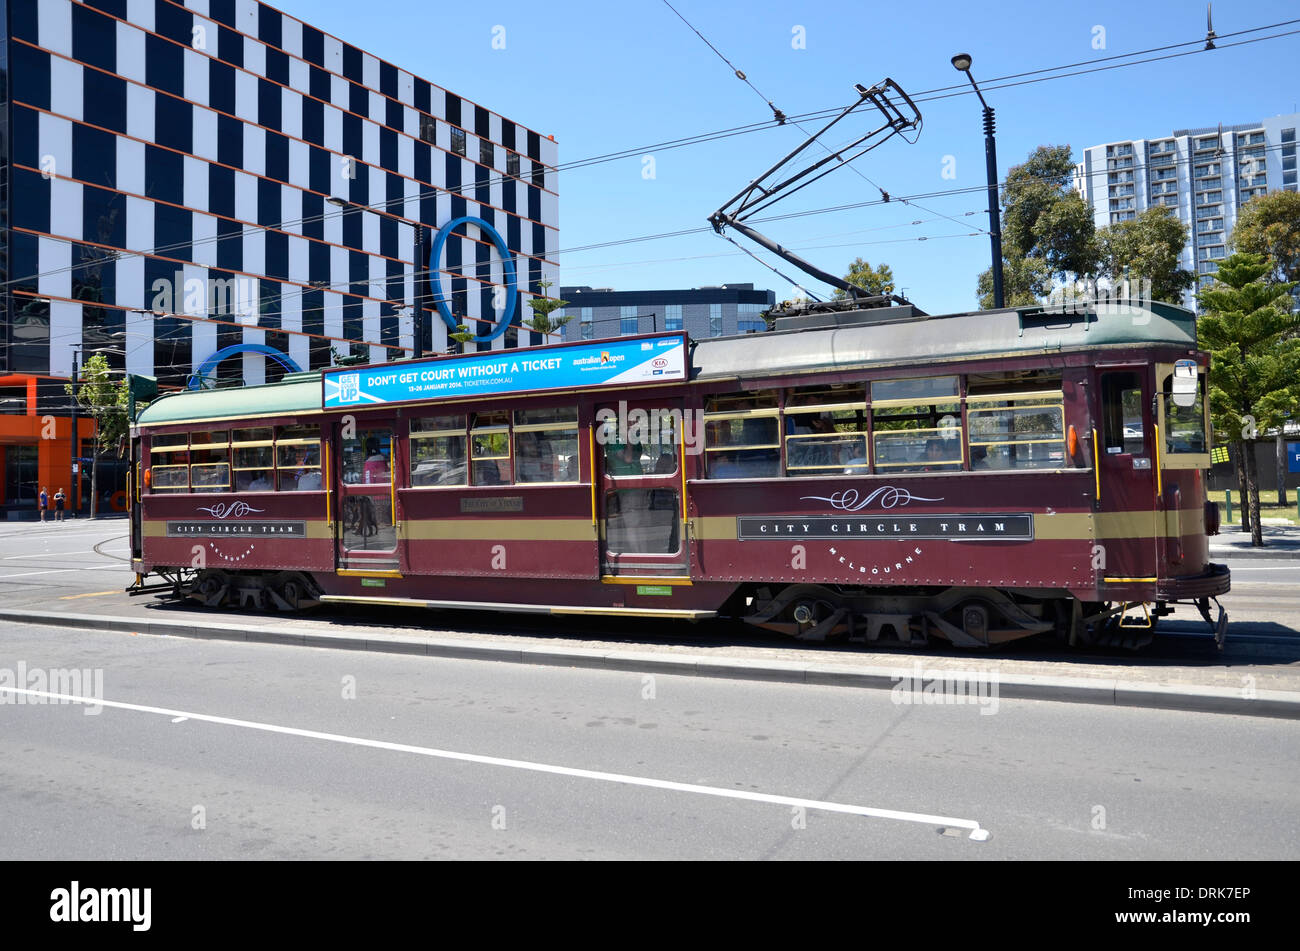 A W7 Class Melbourne Tram at Docklands on the city circle line Stock Photo